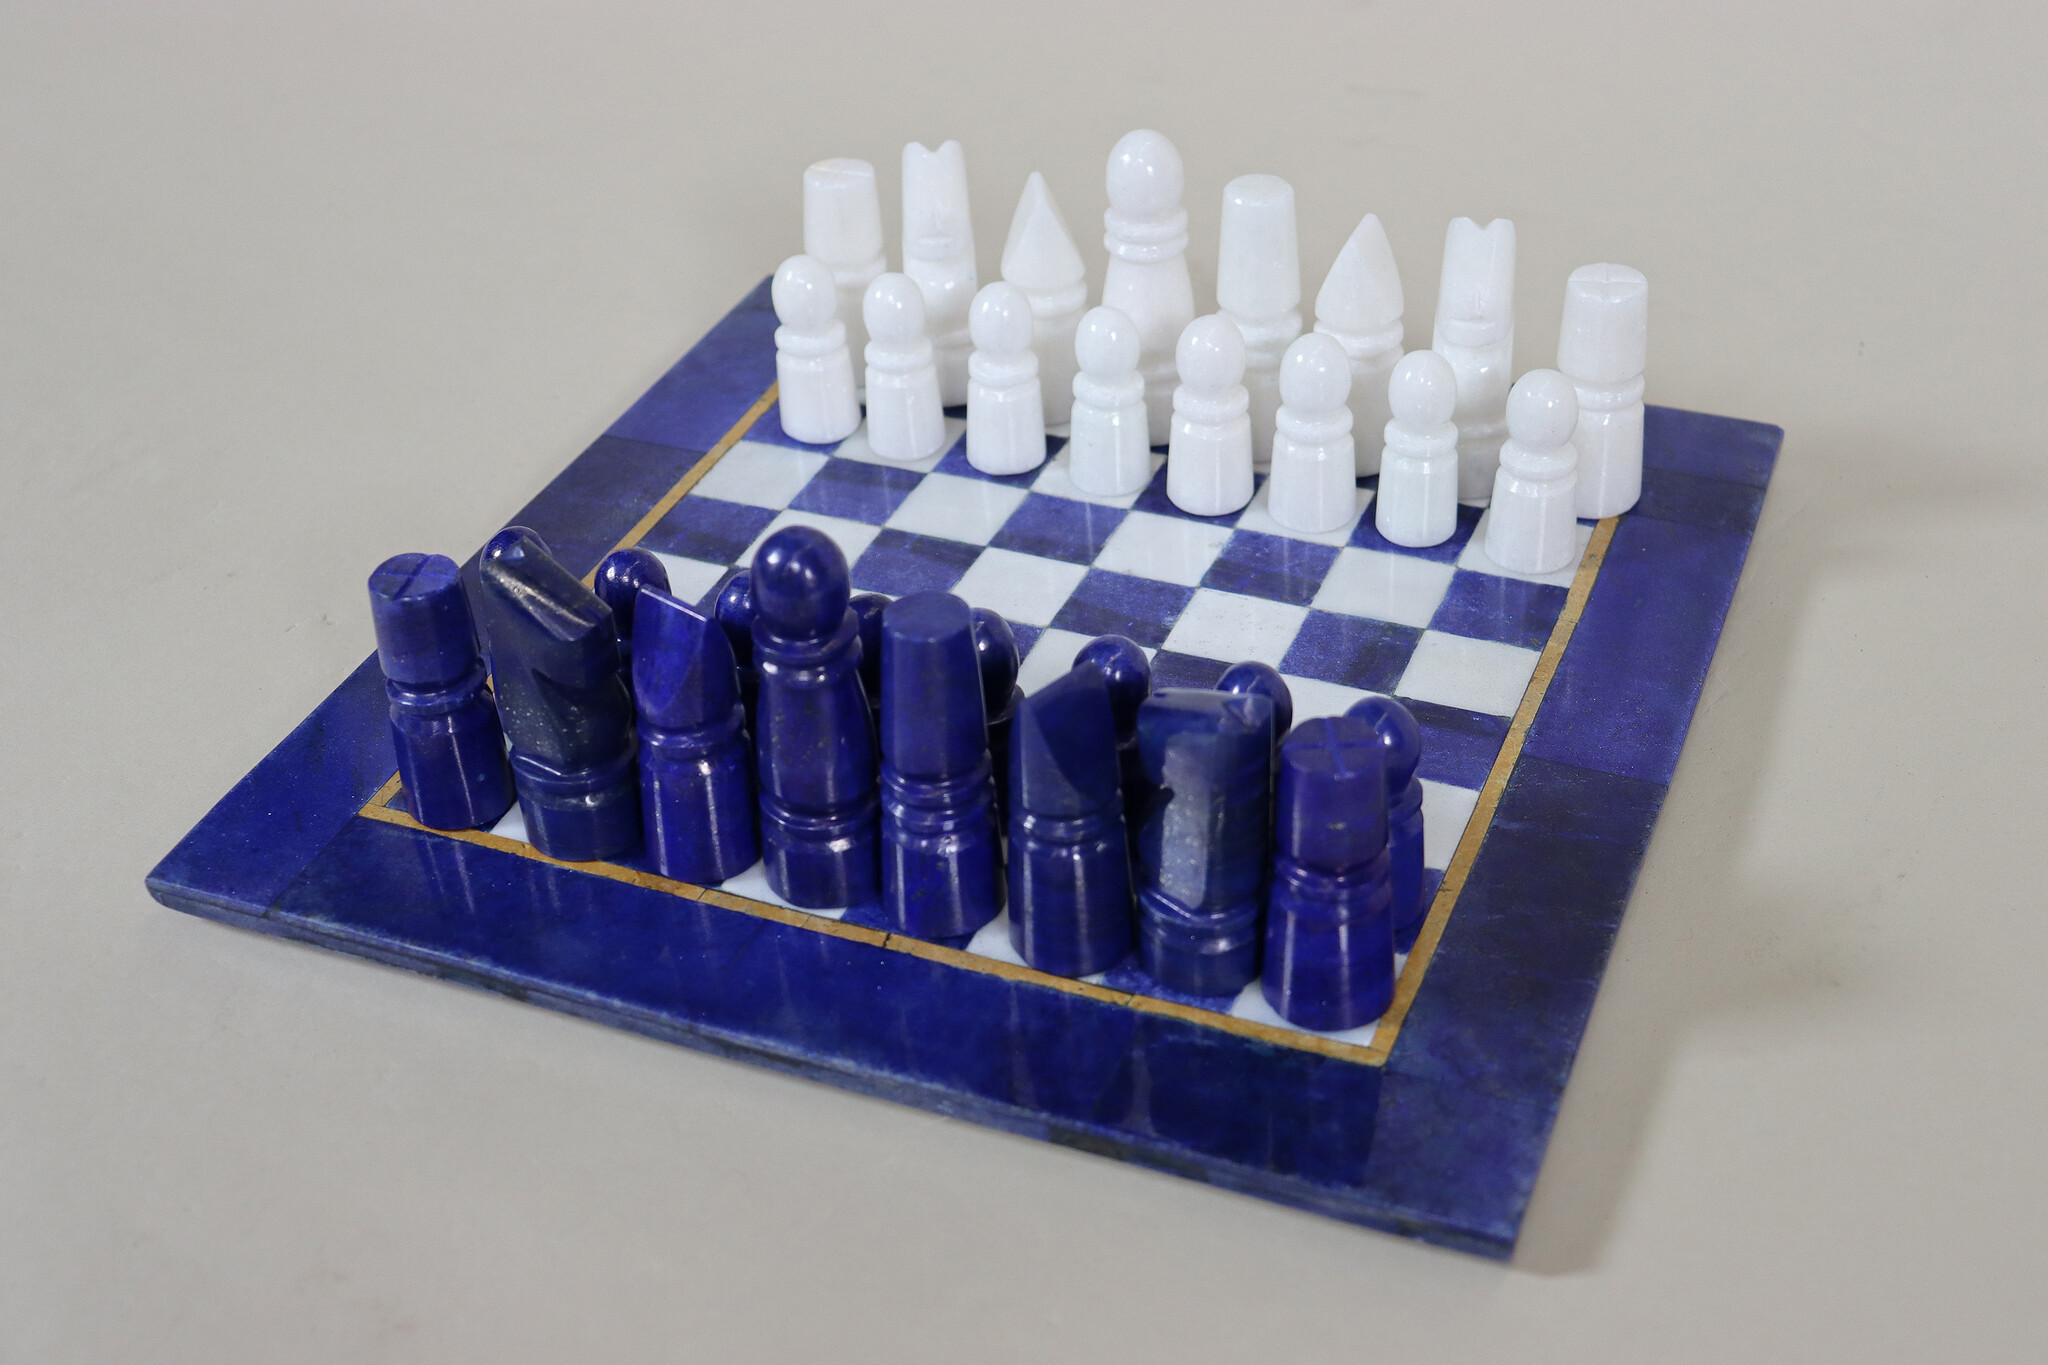 Unique Solid Wood Hand Carved Chess Table Chess Board & Chess Pieces Made From Lapis Lazuli Marble Handmade Chess Set from Afghanistan